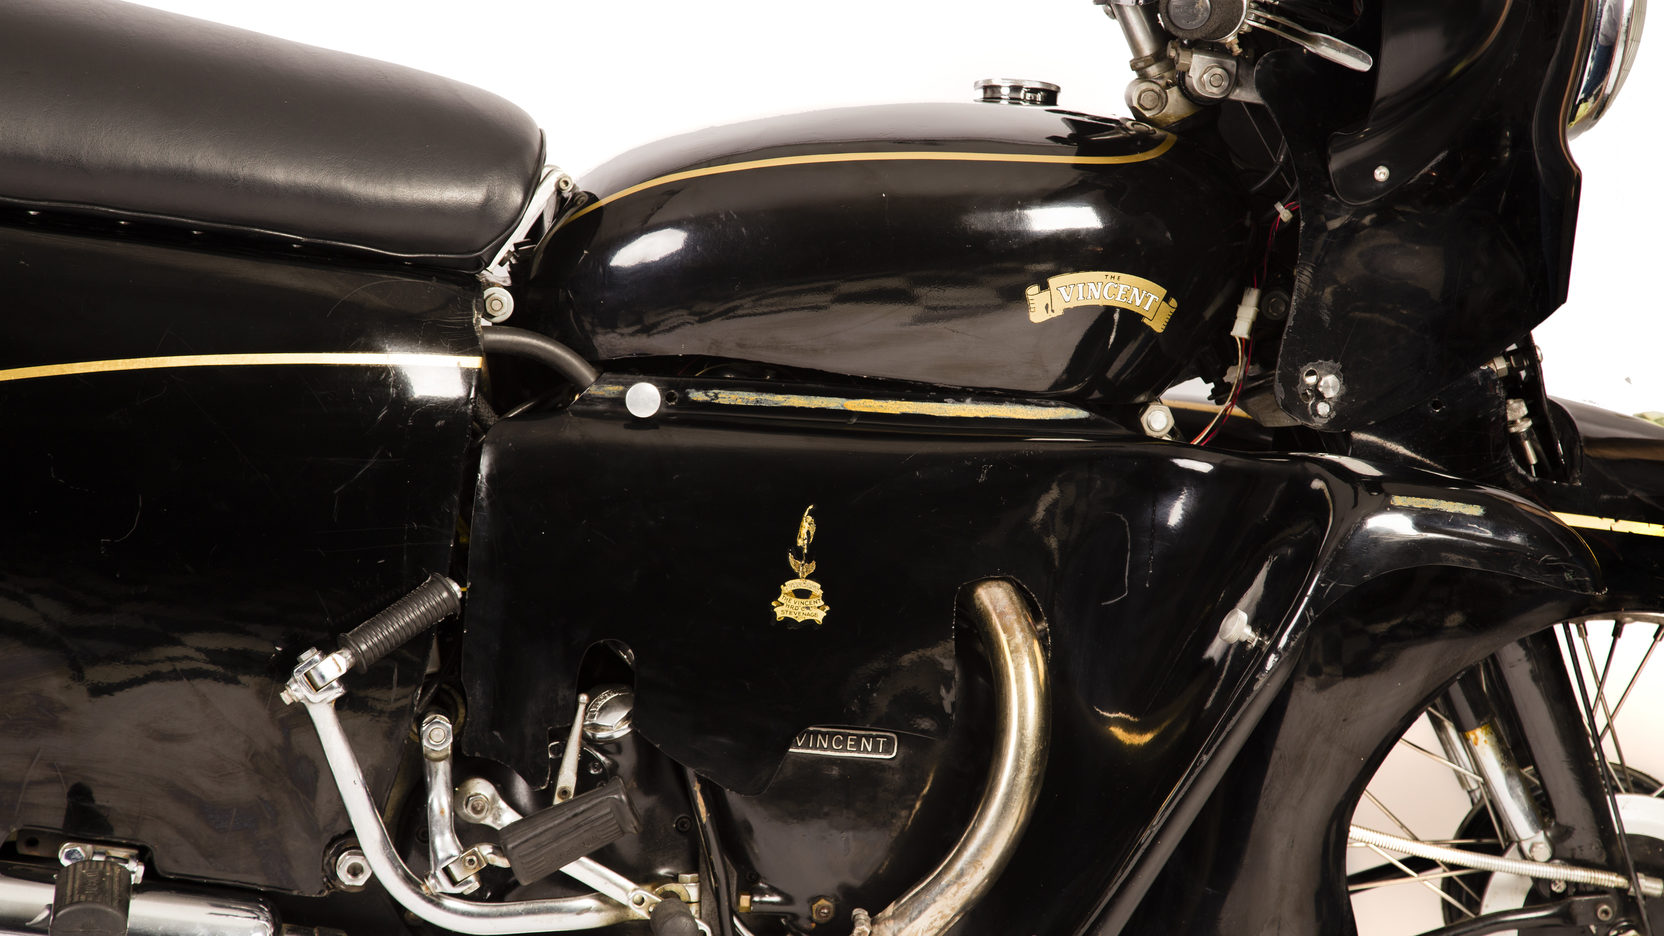 Behind the stylish fairing is a Vincent Black Shadow 998cc V twin engine. Interestingly the fairing ducted air in such a way as to improve the engine's cooling, especially the rear cylinder.